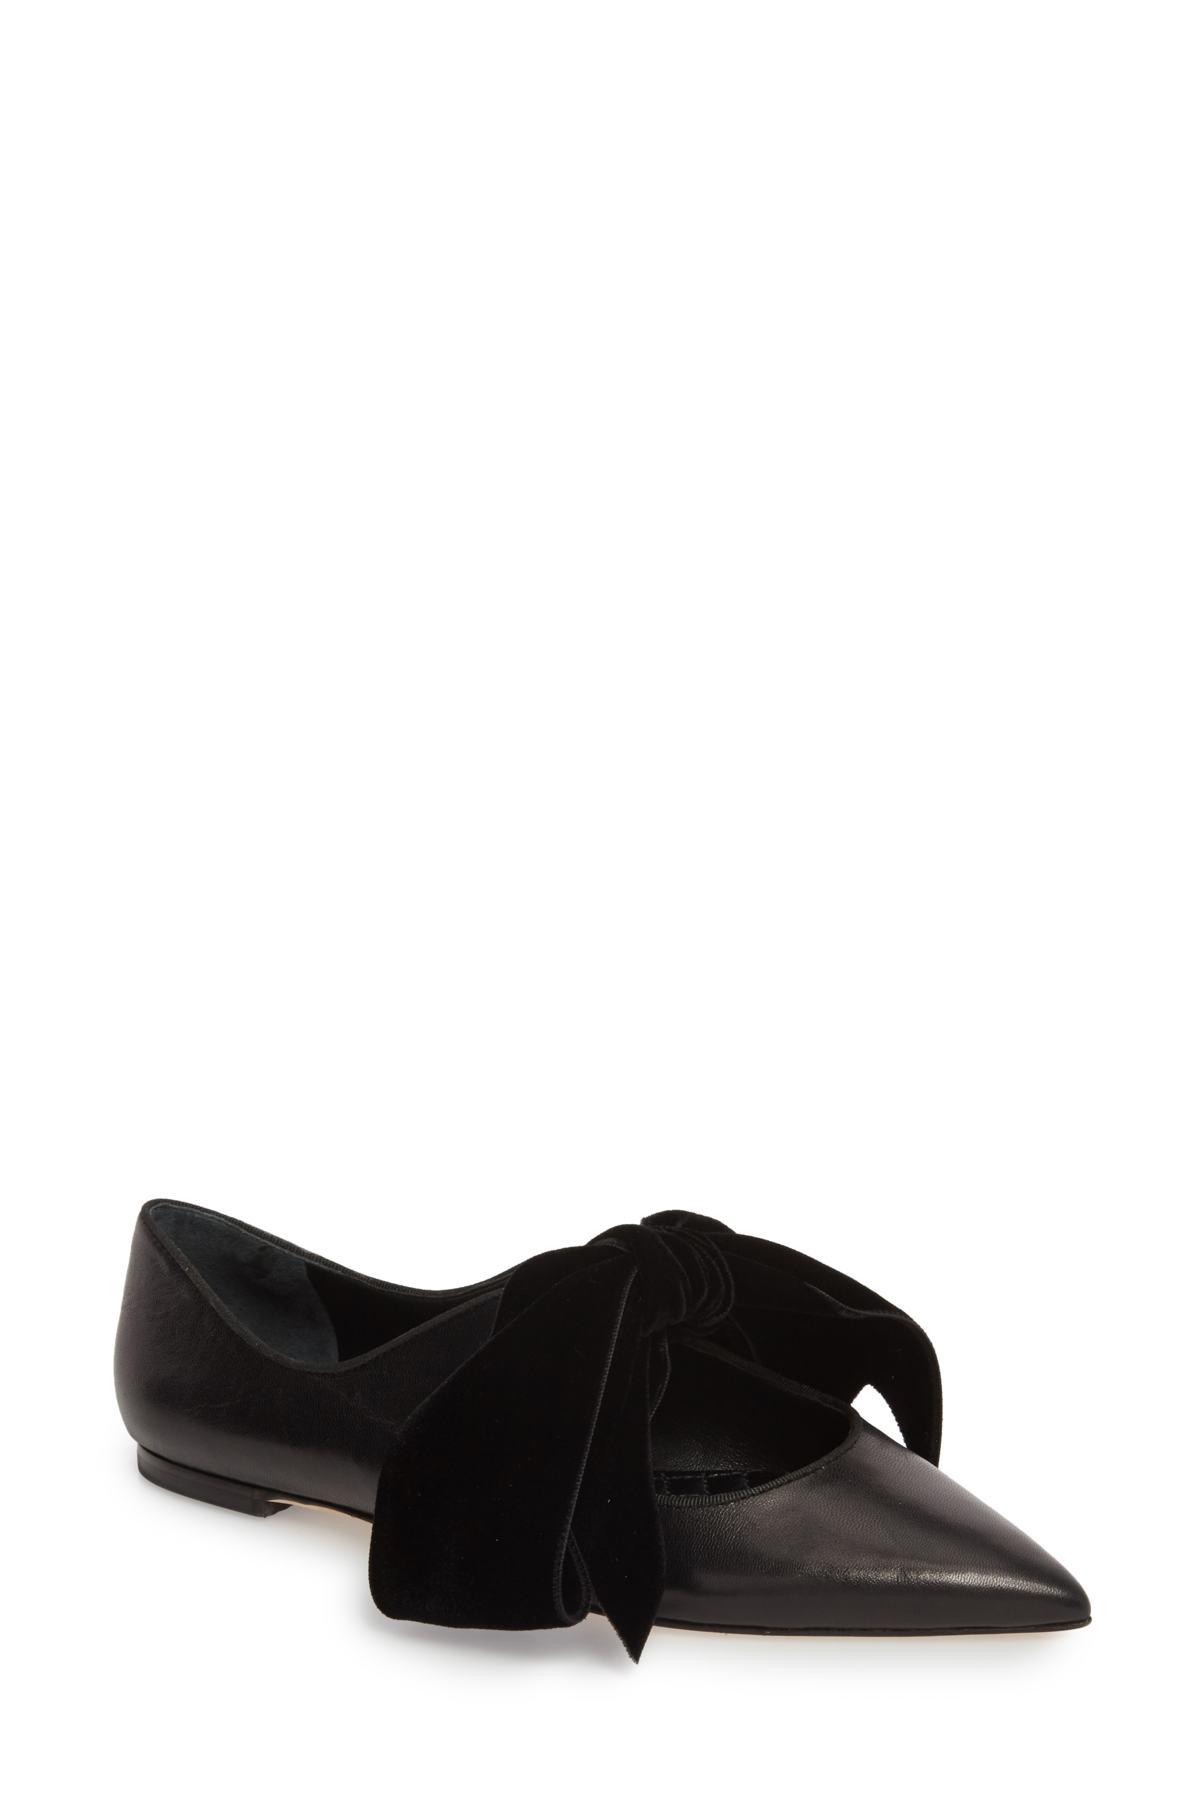 Tory Burch Clara Ballet Flats With Large Velvet Bow in Black - Lyst